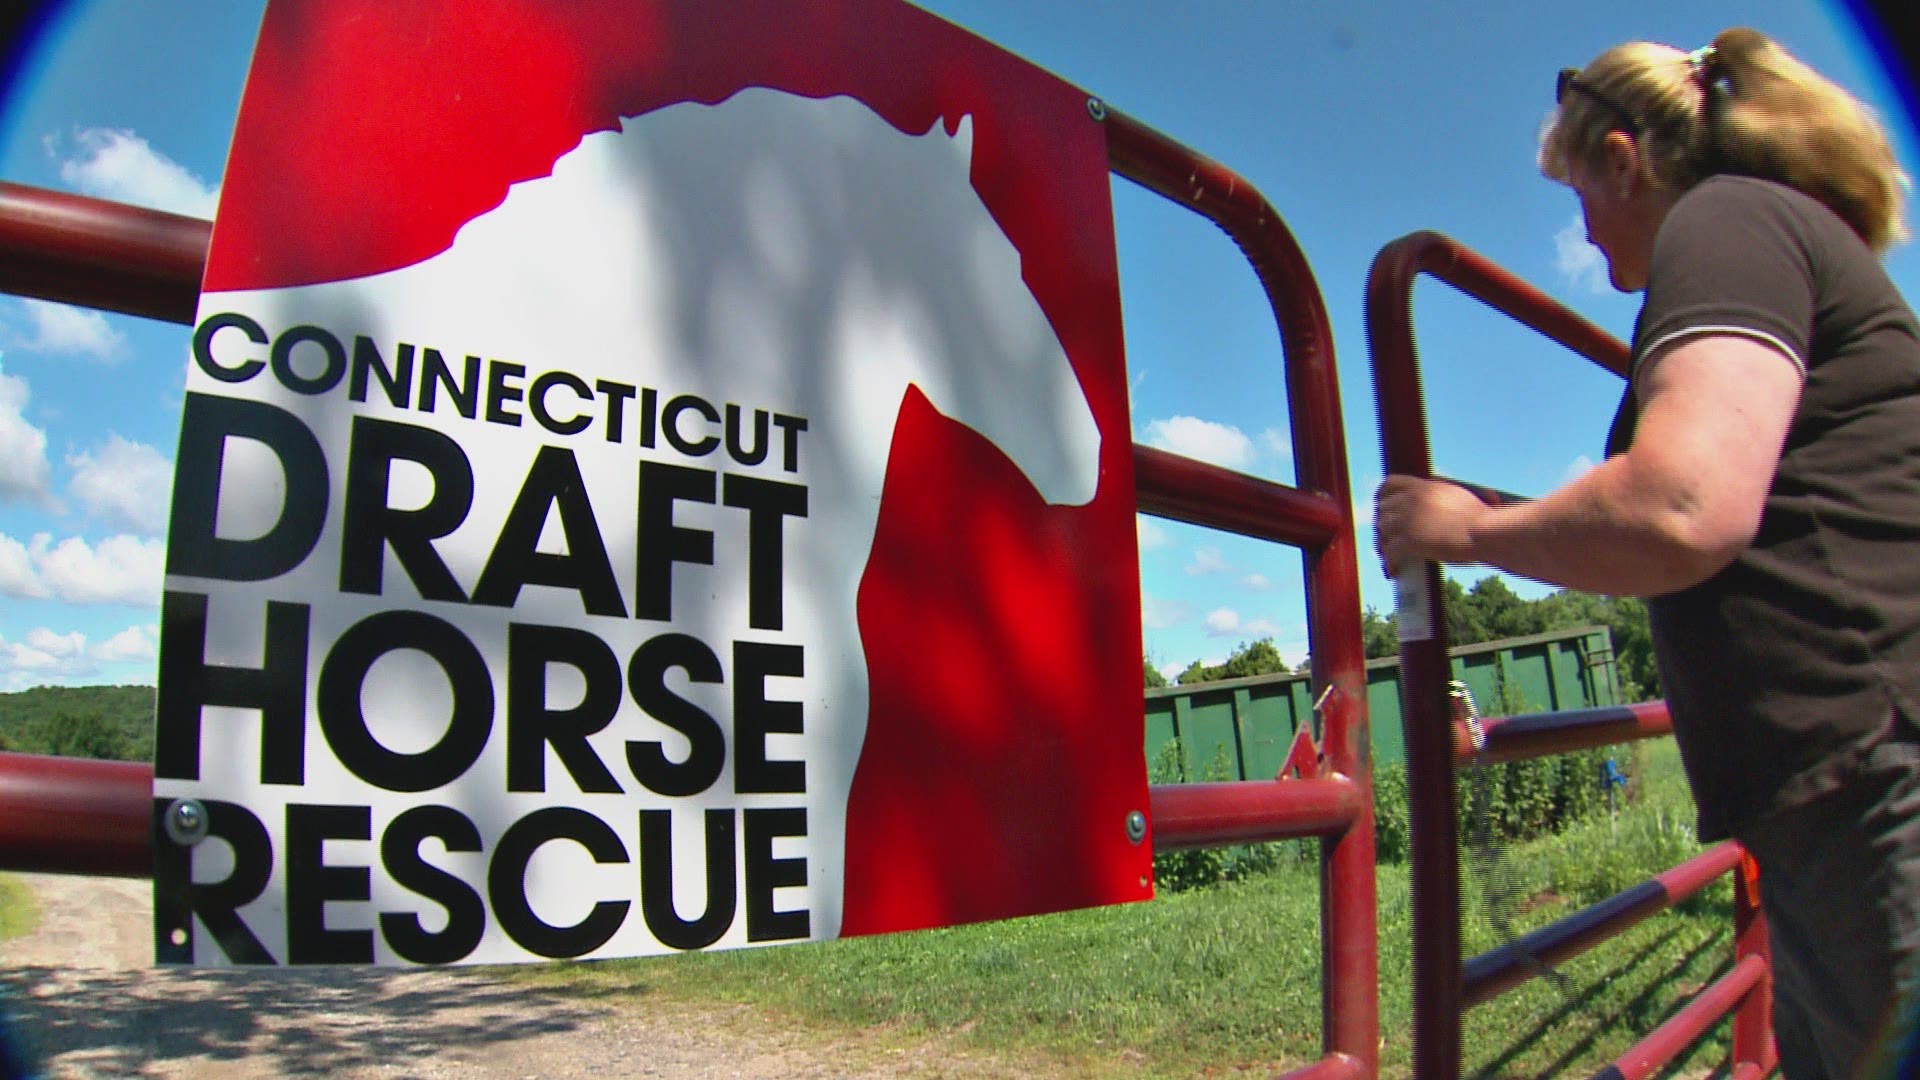 During the pandemic, people have more time on their hands and, as a result, more people have signed up to volunteer at the Draft Horse Rescue.